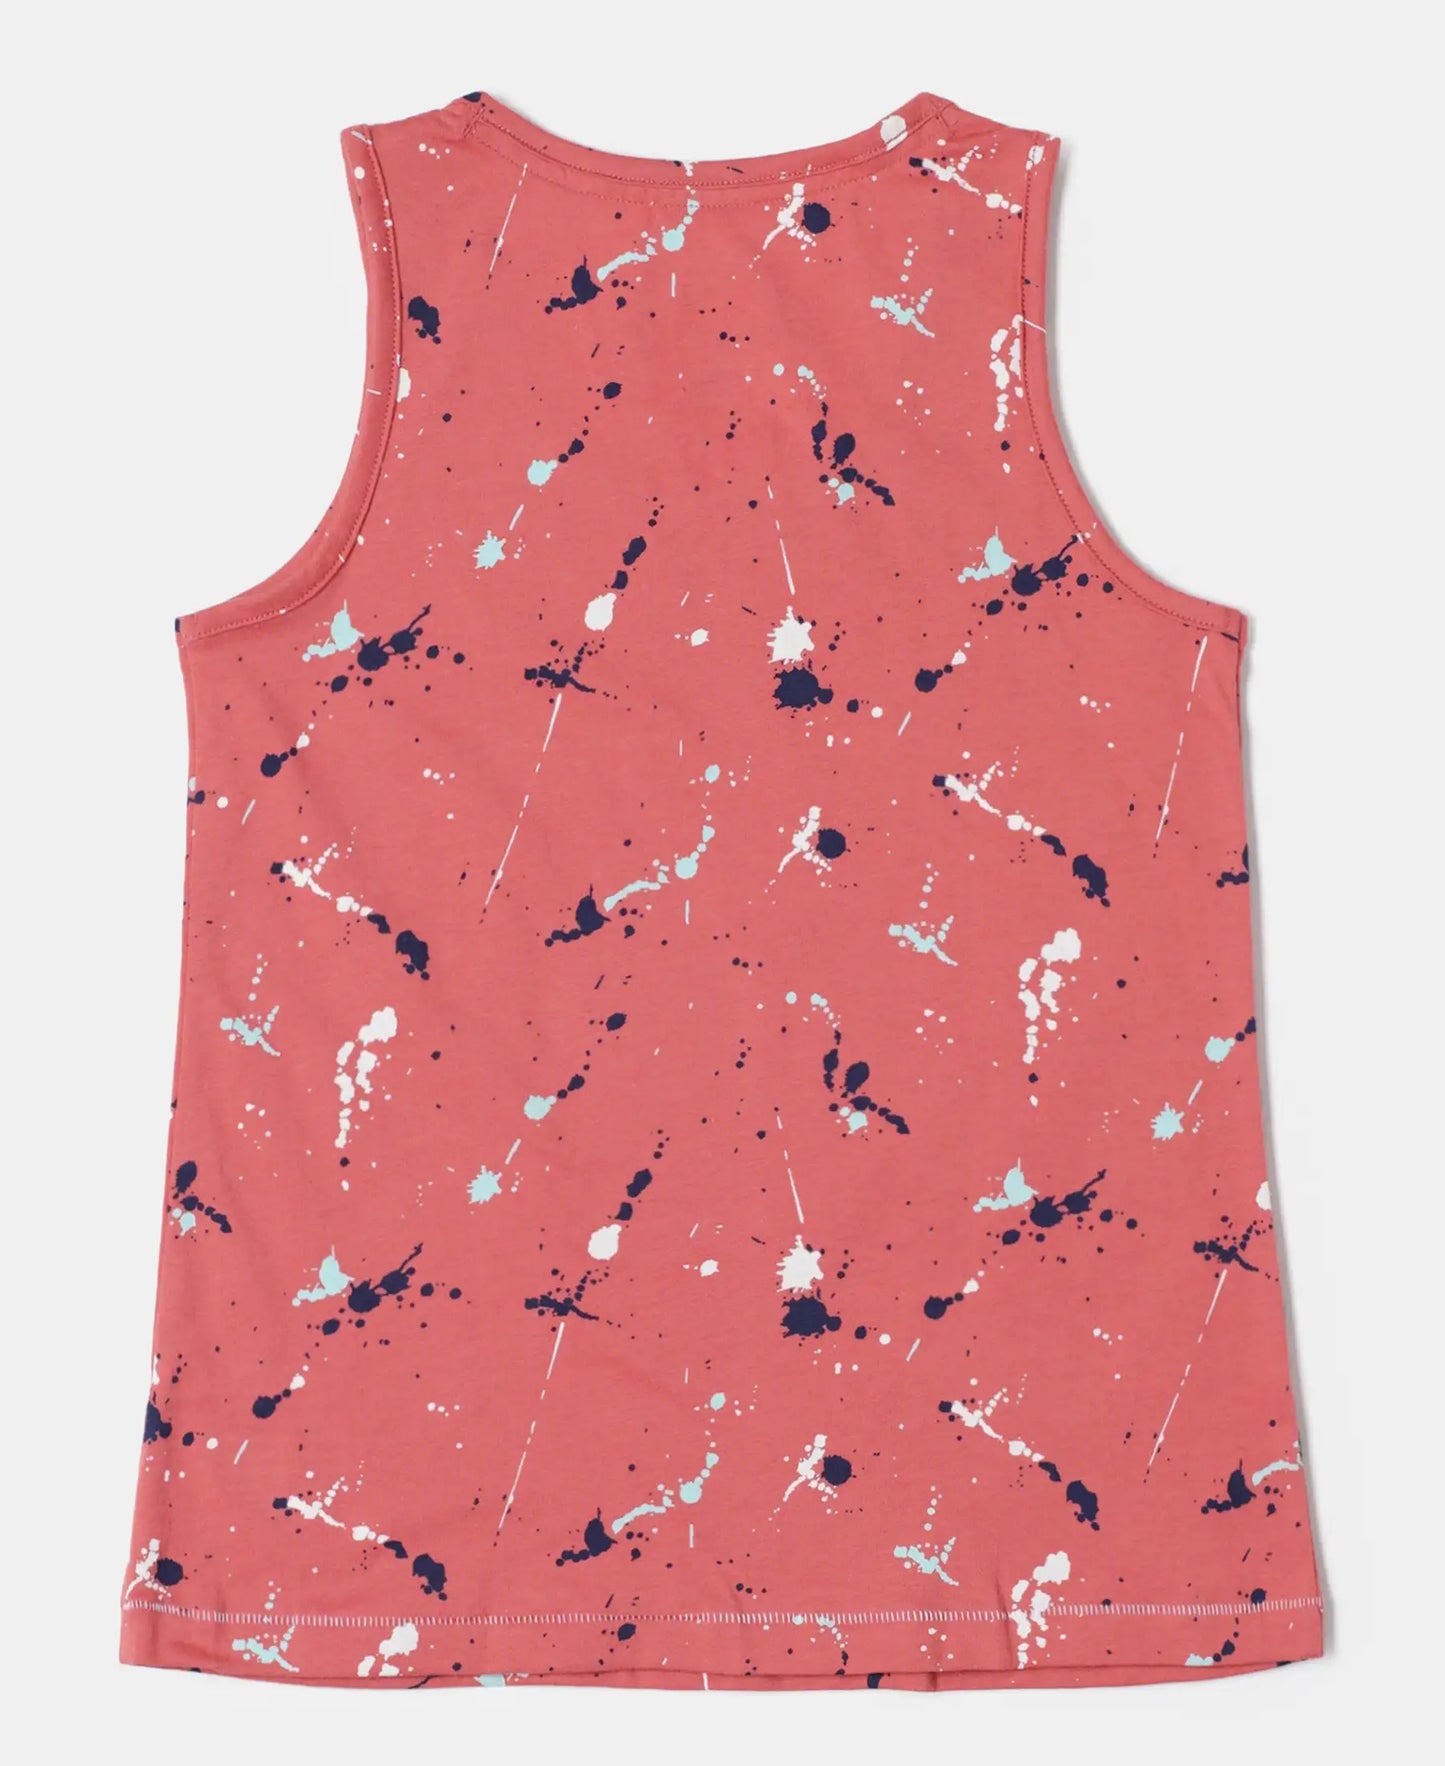 Super Combed Cotton Printed Tank Top - Faded Rose-2